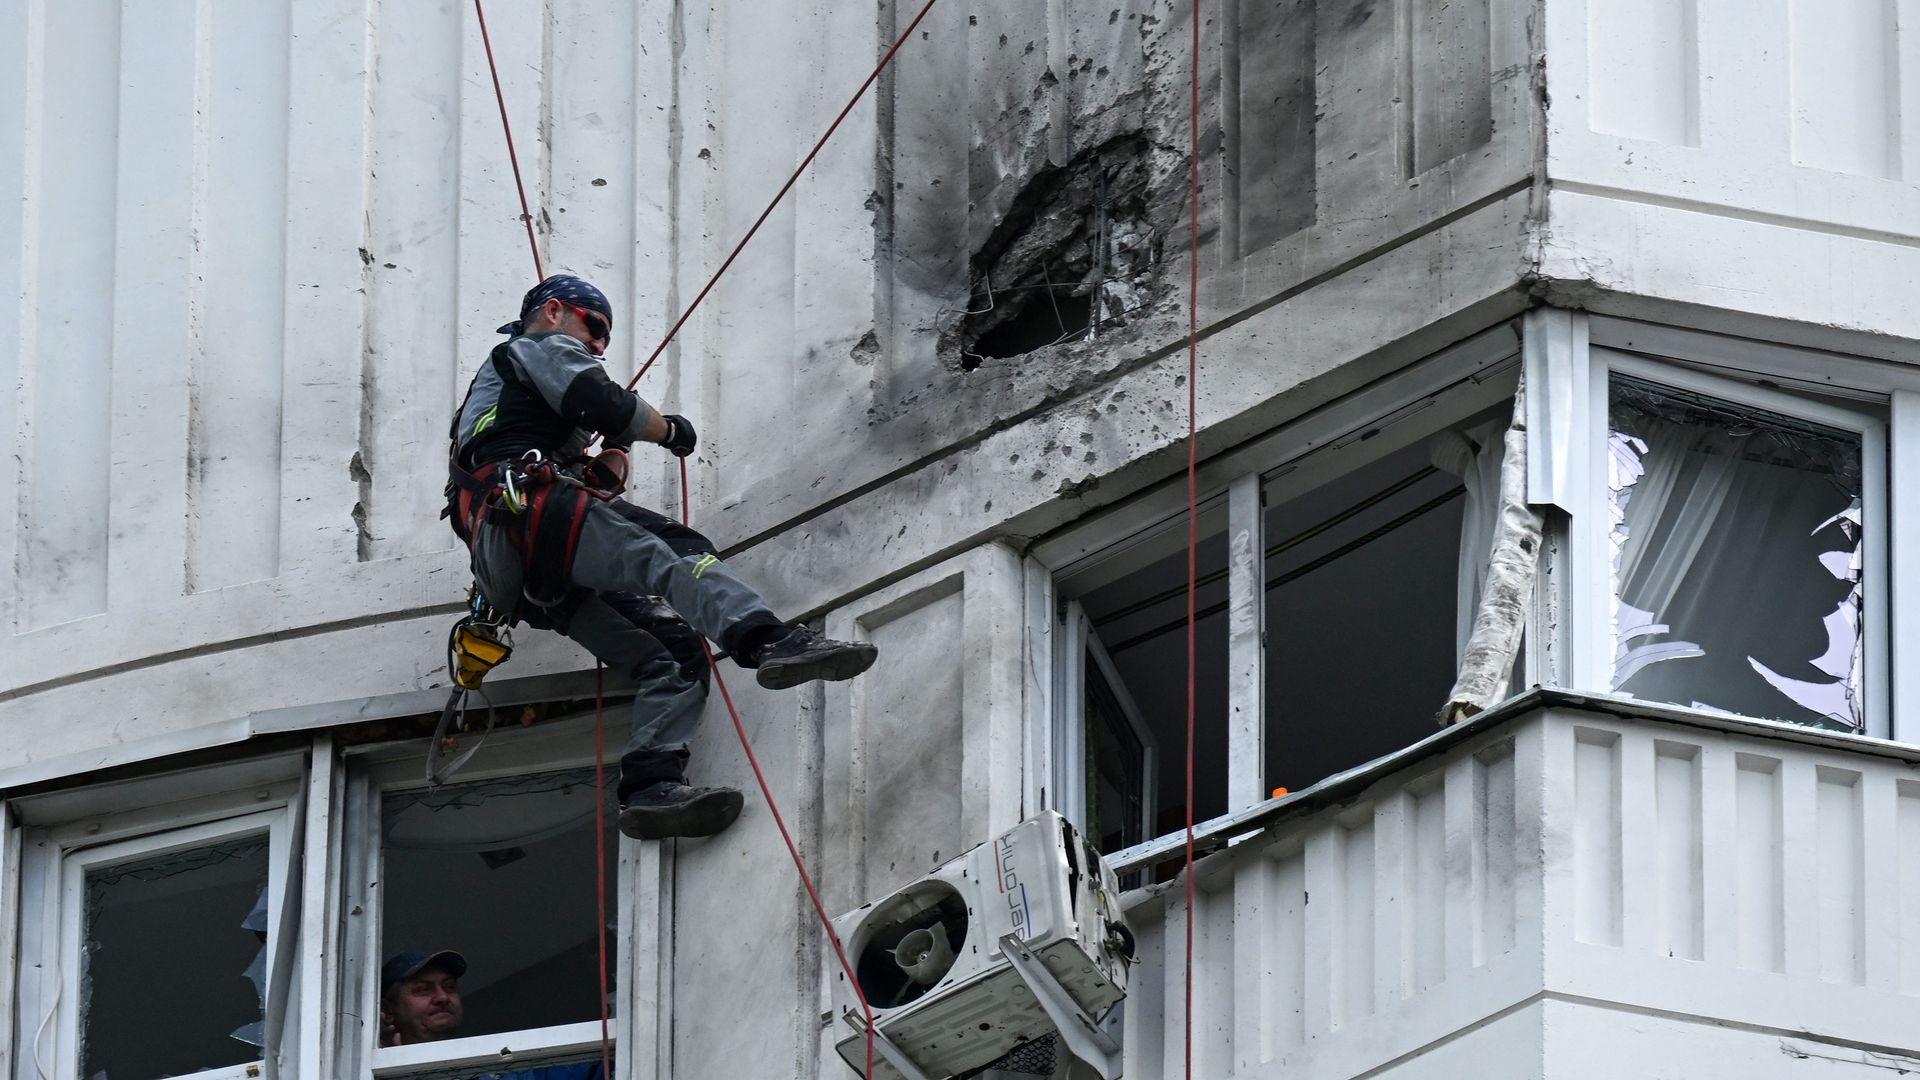 A specialist inspects the damaged facade of a multi-storey apartment building after a reported drone attack in Moscow on May 30, 2023. (Photo by Kirill KUDRYAVTSEV / AFP